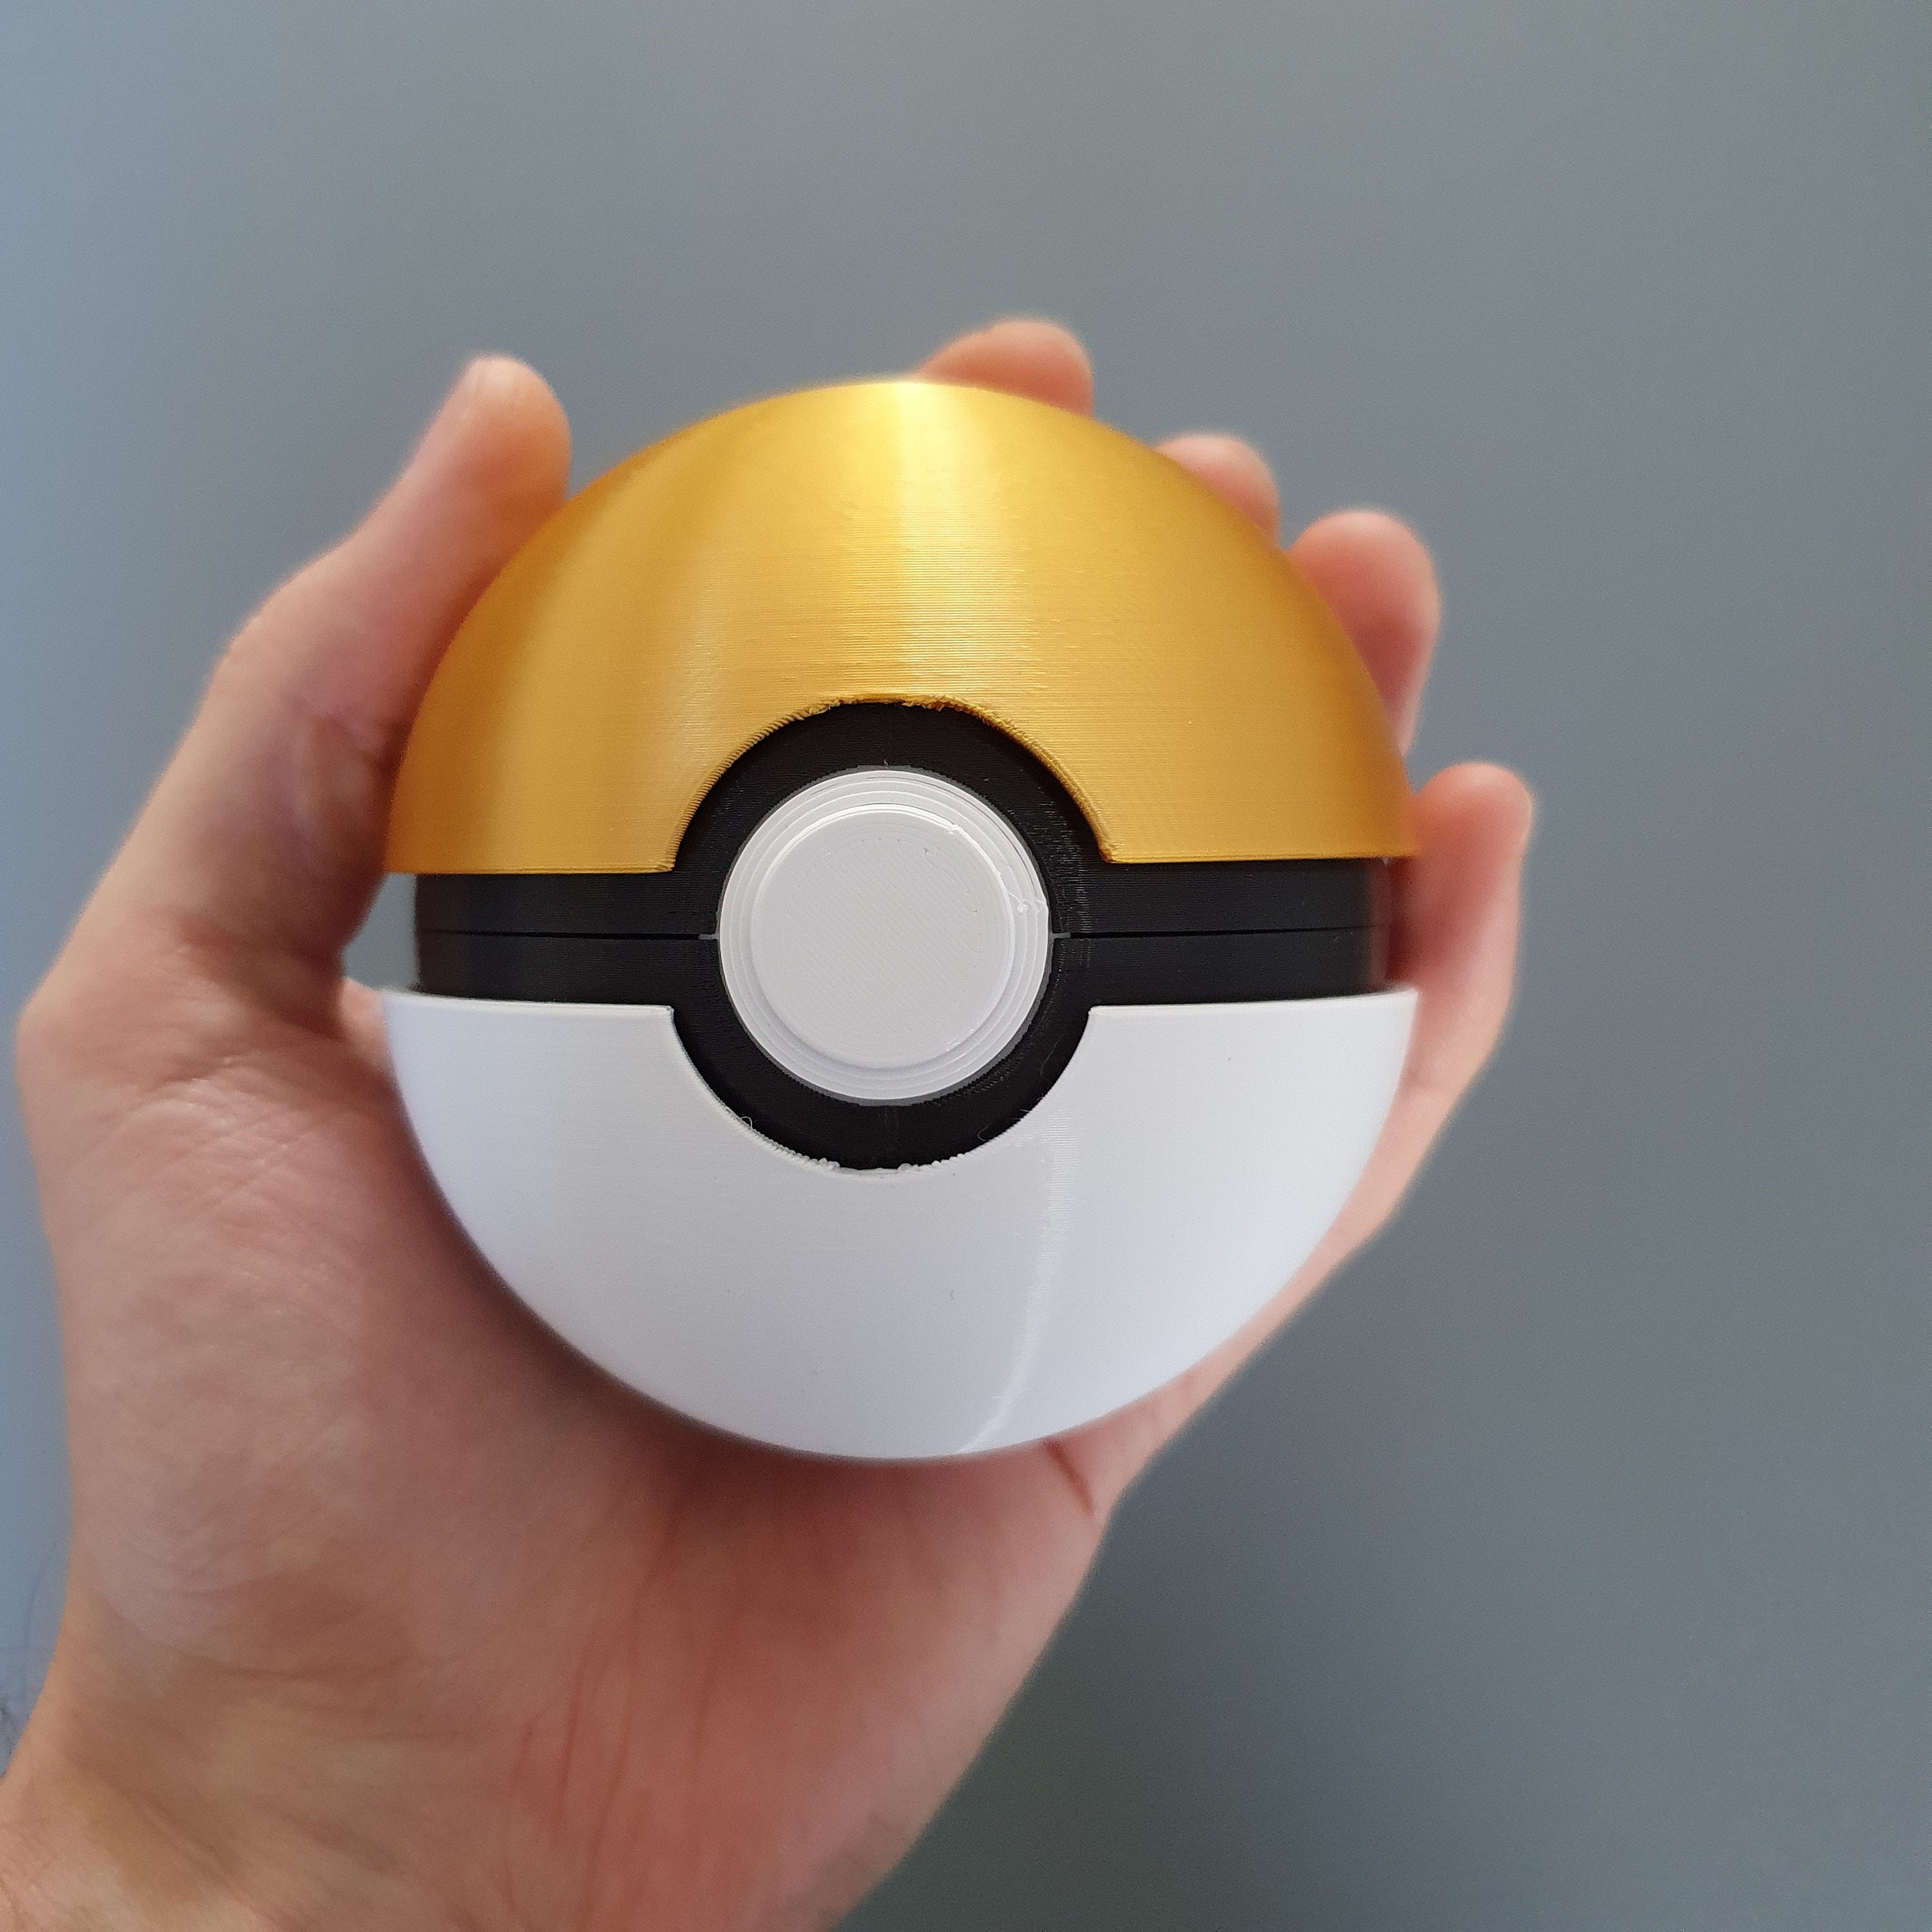 Gs Pokeball Replica Functioning Button Release Lid Etsy